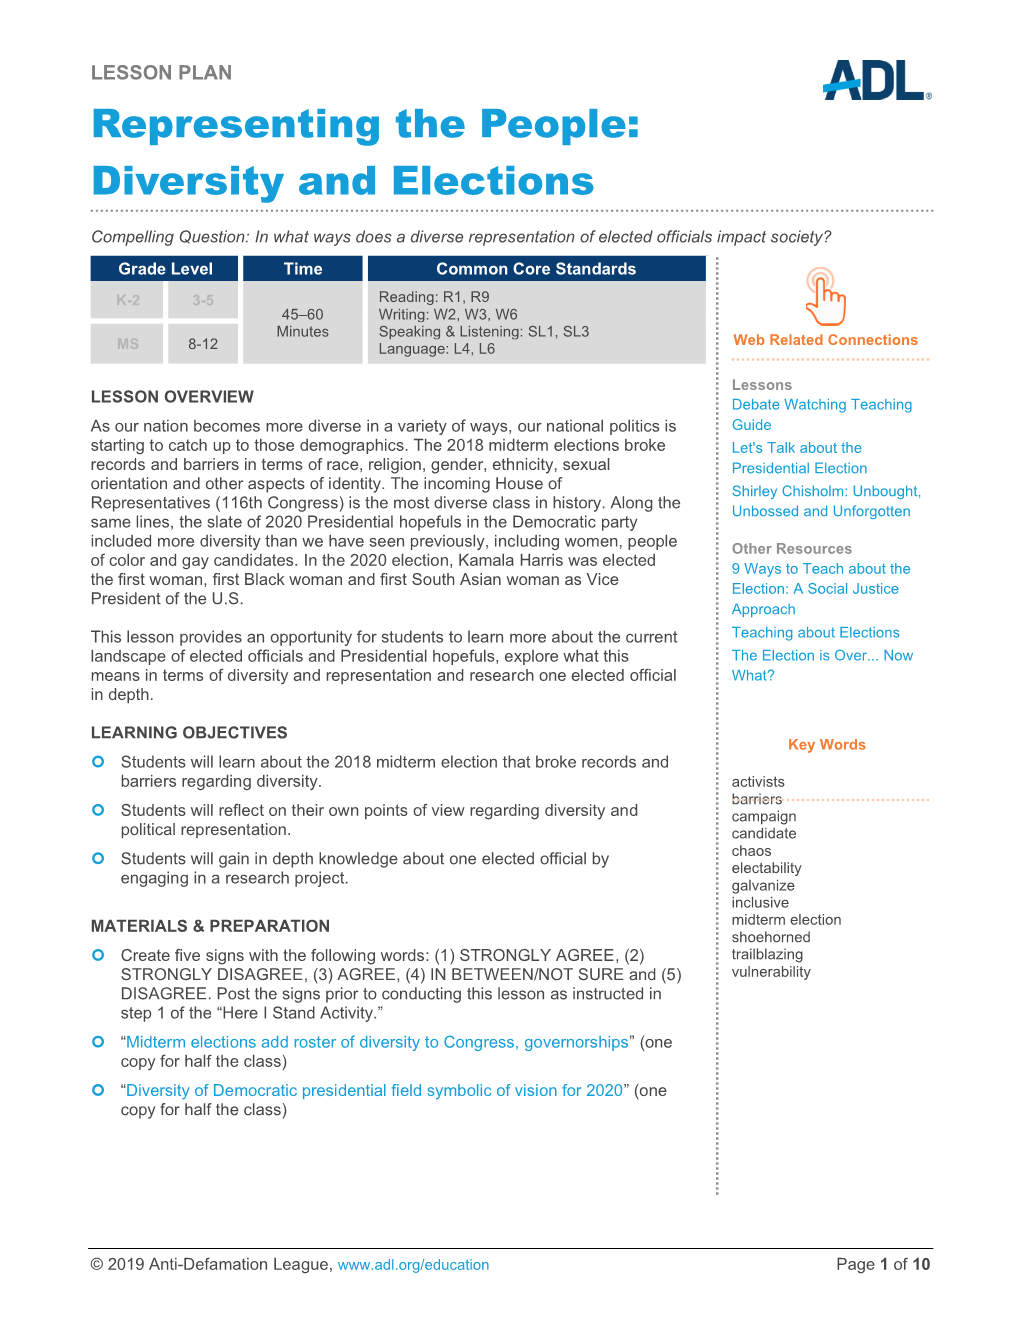 Representing the People: Diversity and Elections